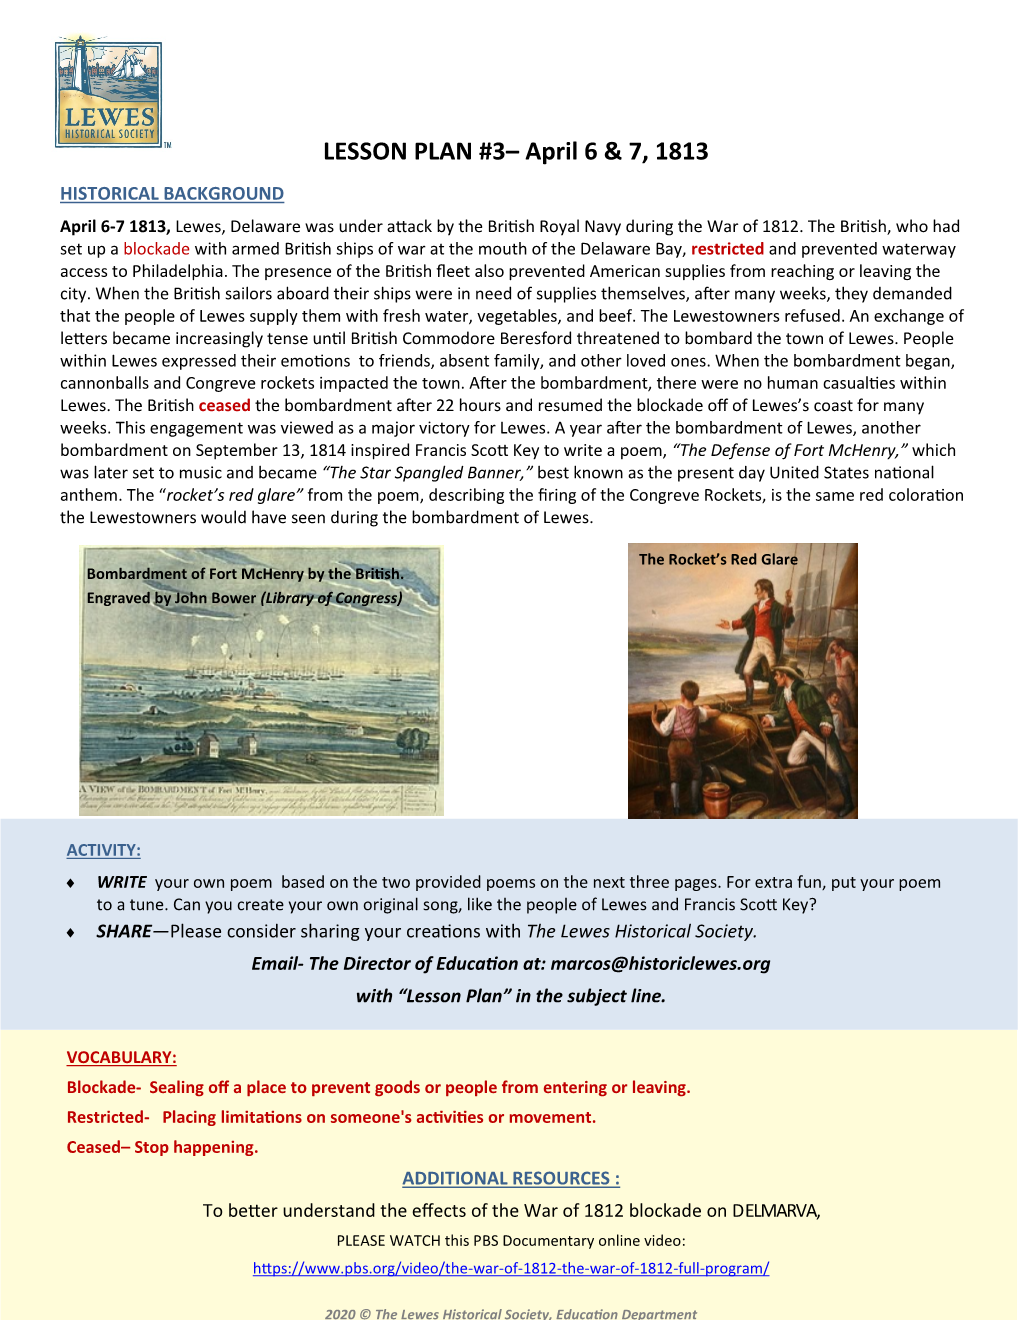 LESSON PLAN #3– April 6 & 7, 1813 HISTORICAL BACKGROUND April 6-7 1813, Lewes, Delaware Was Under Attack by the British Royal Navy During the War of 1812